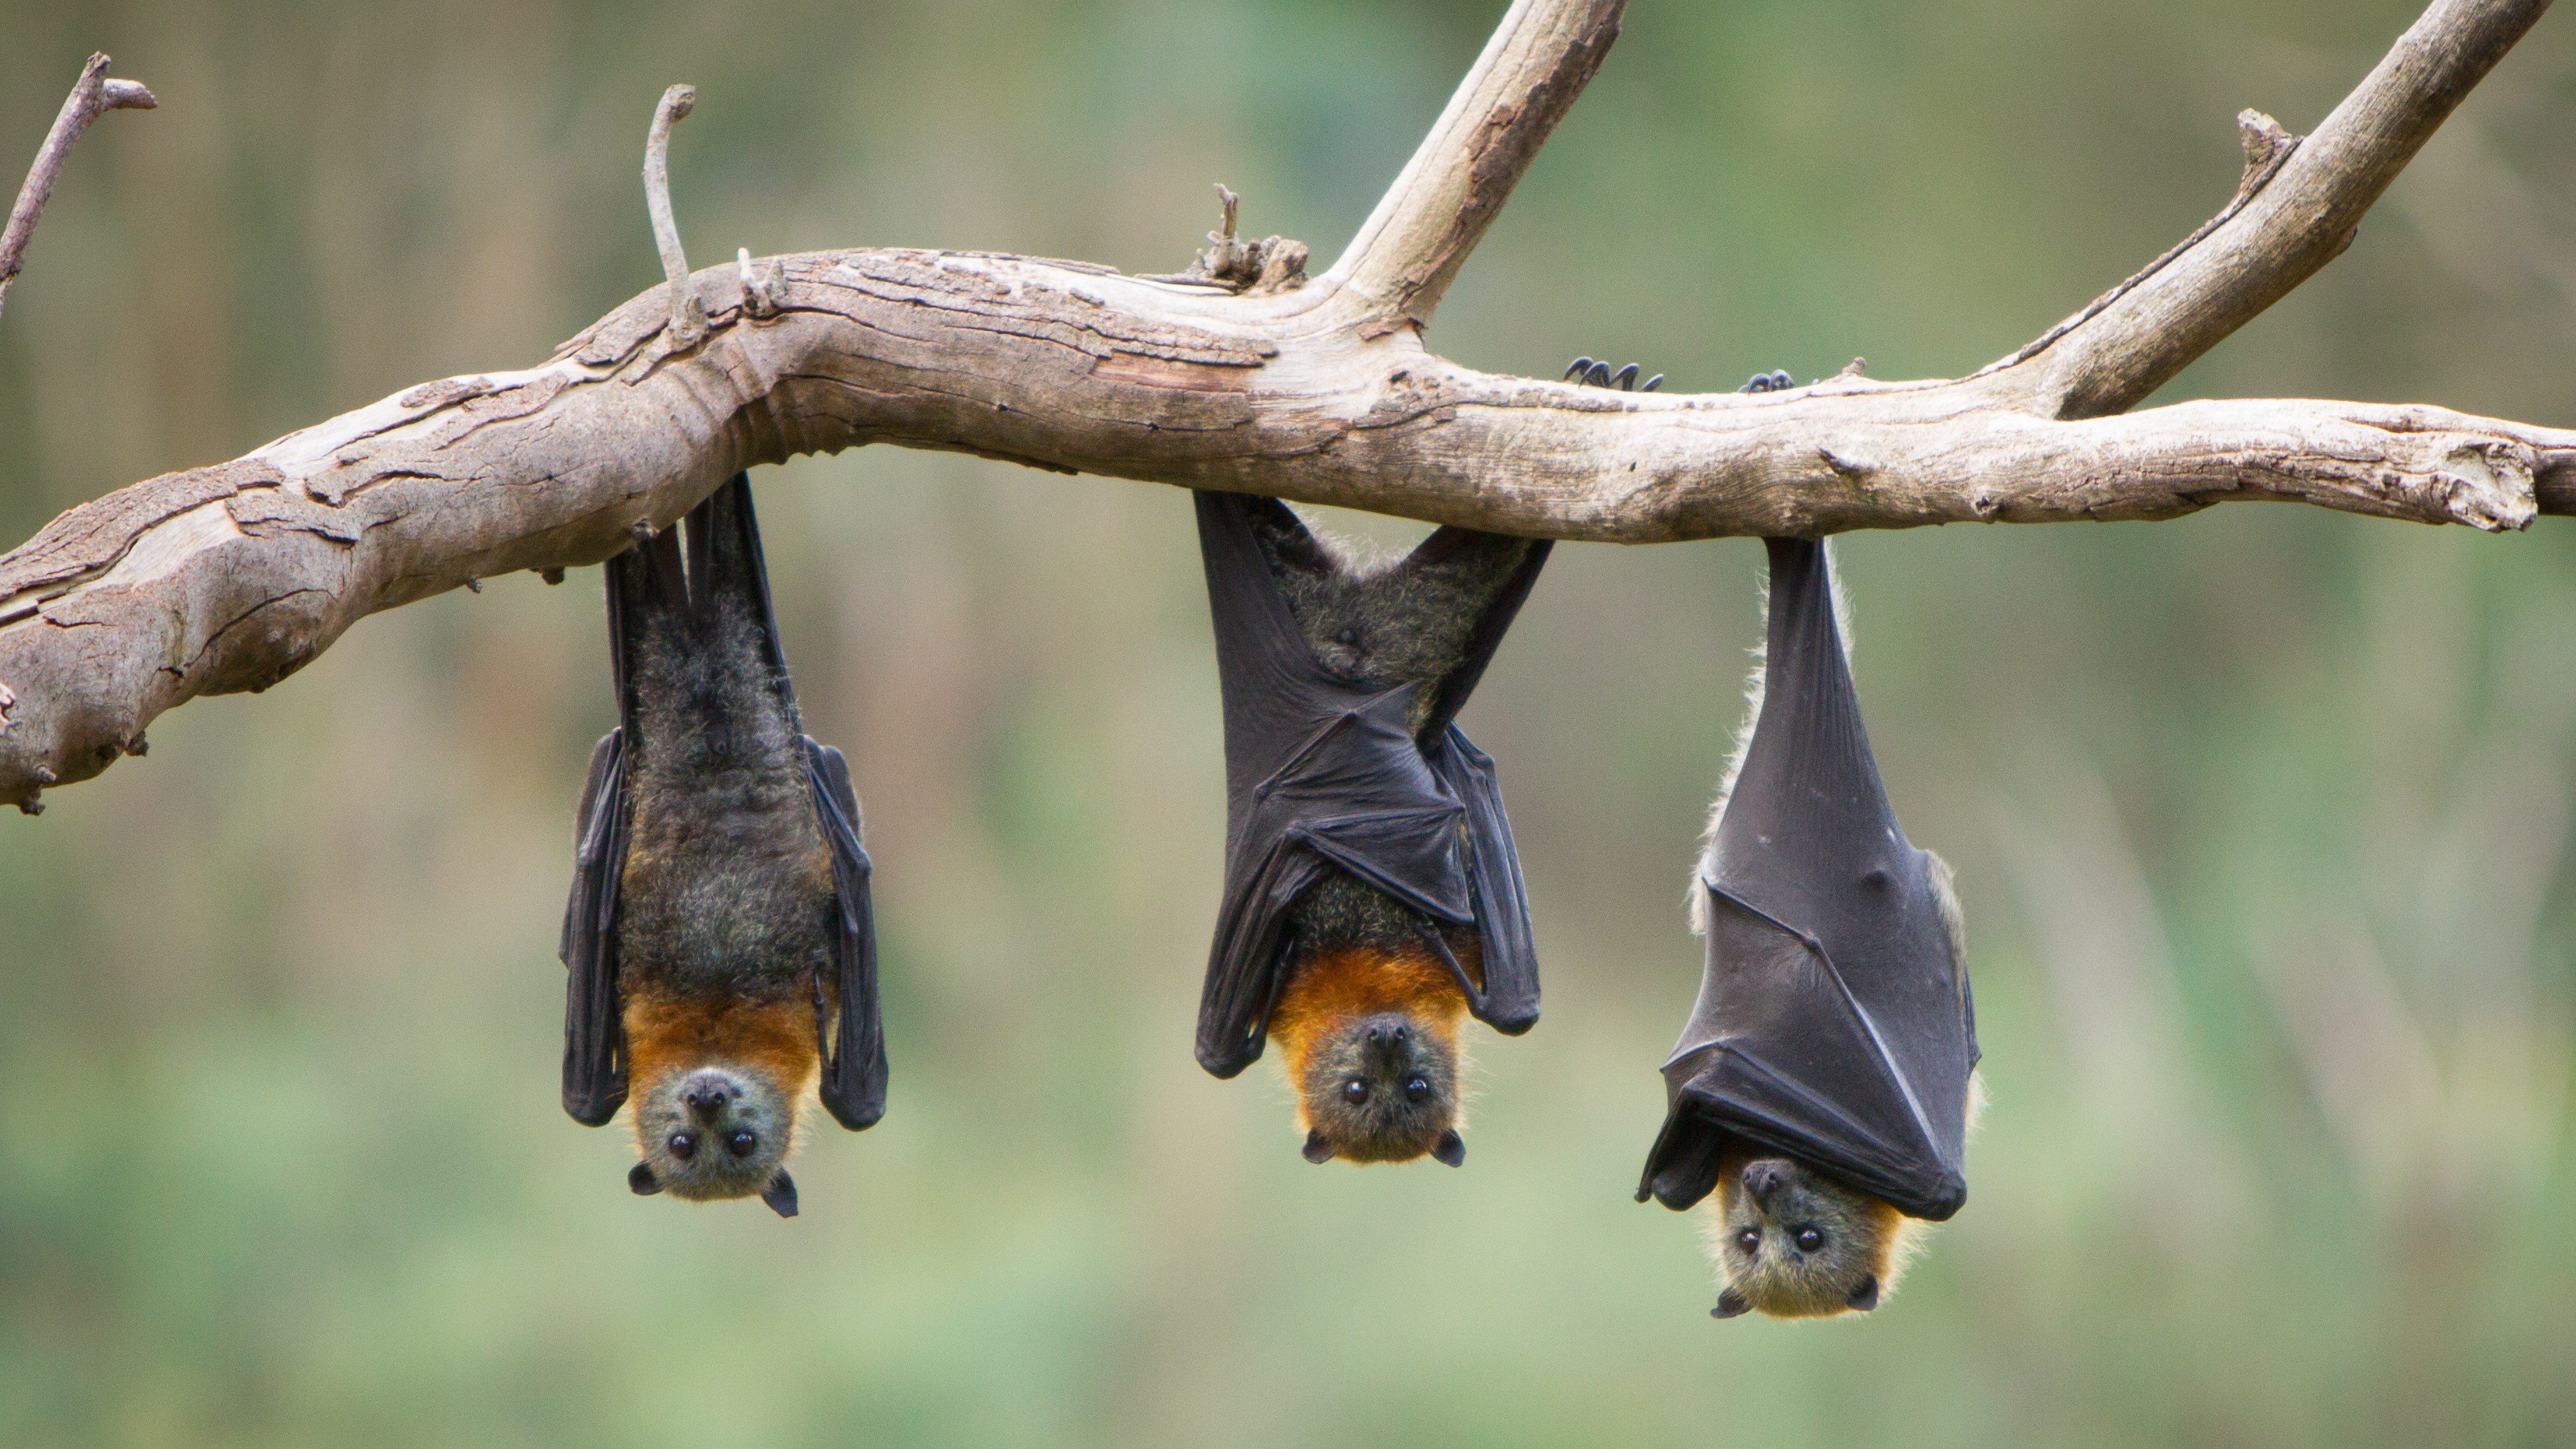 Paratus launches with $100M and a mission to 'embrace the bats'